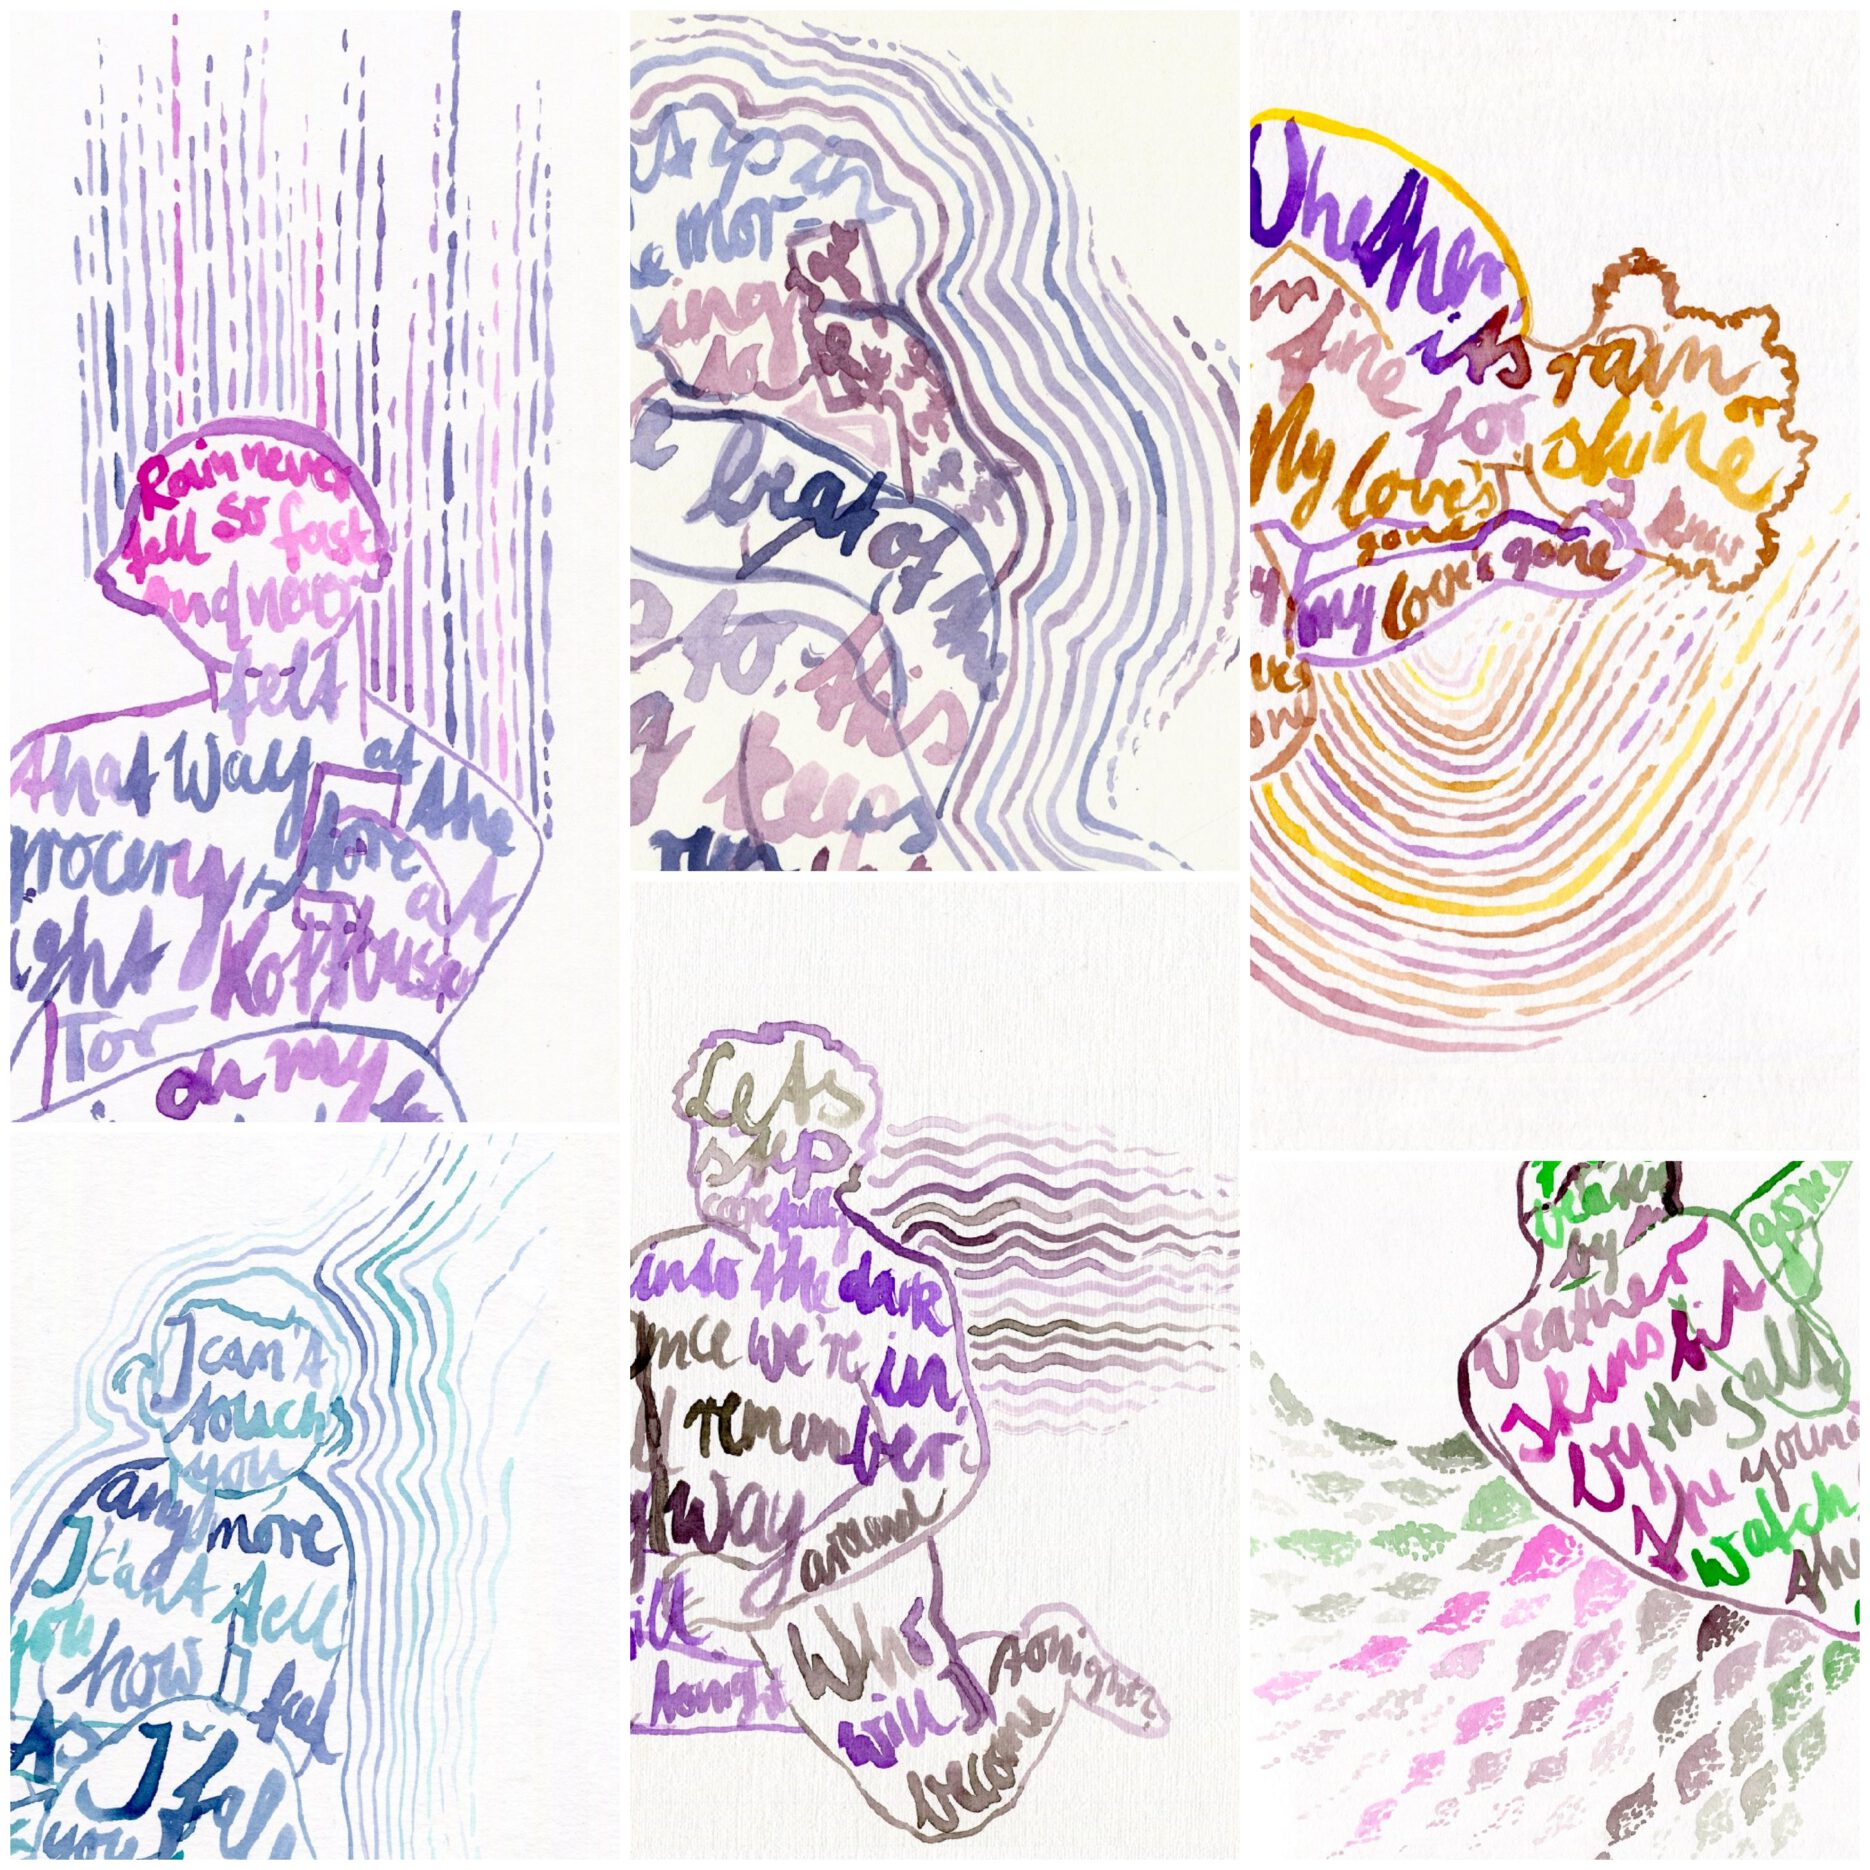 Collage of 6 drawings, each is a person with lyrics on them in colourful ink shades